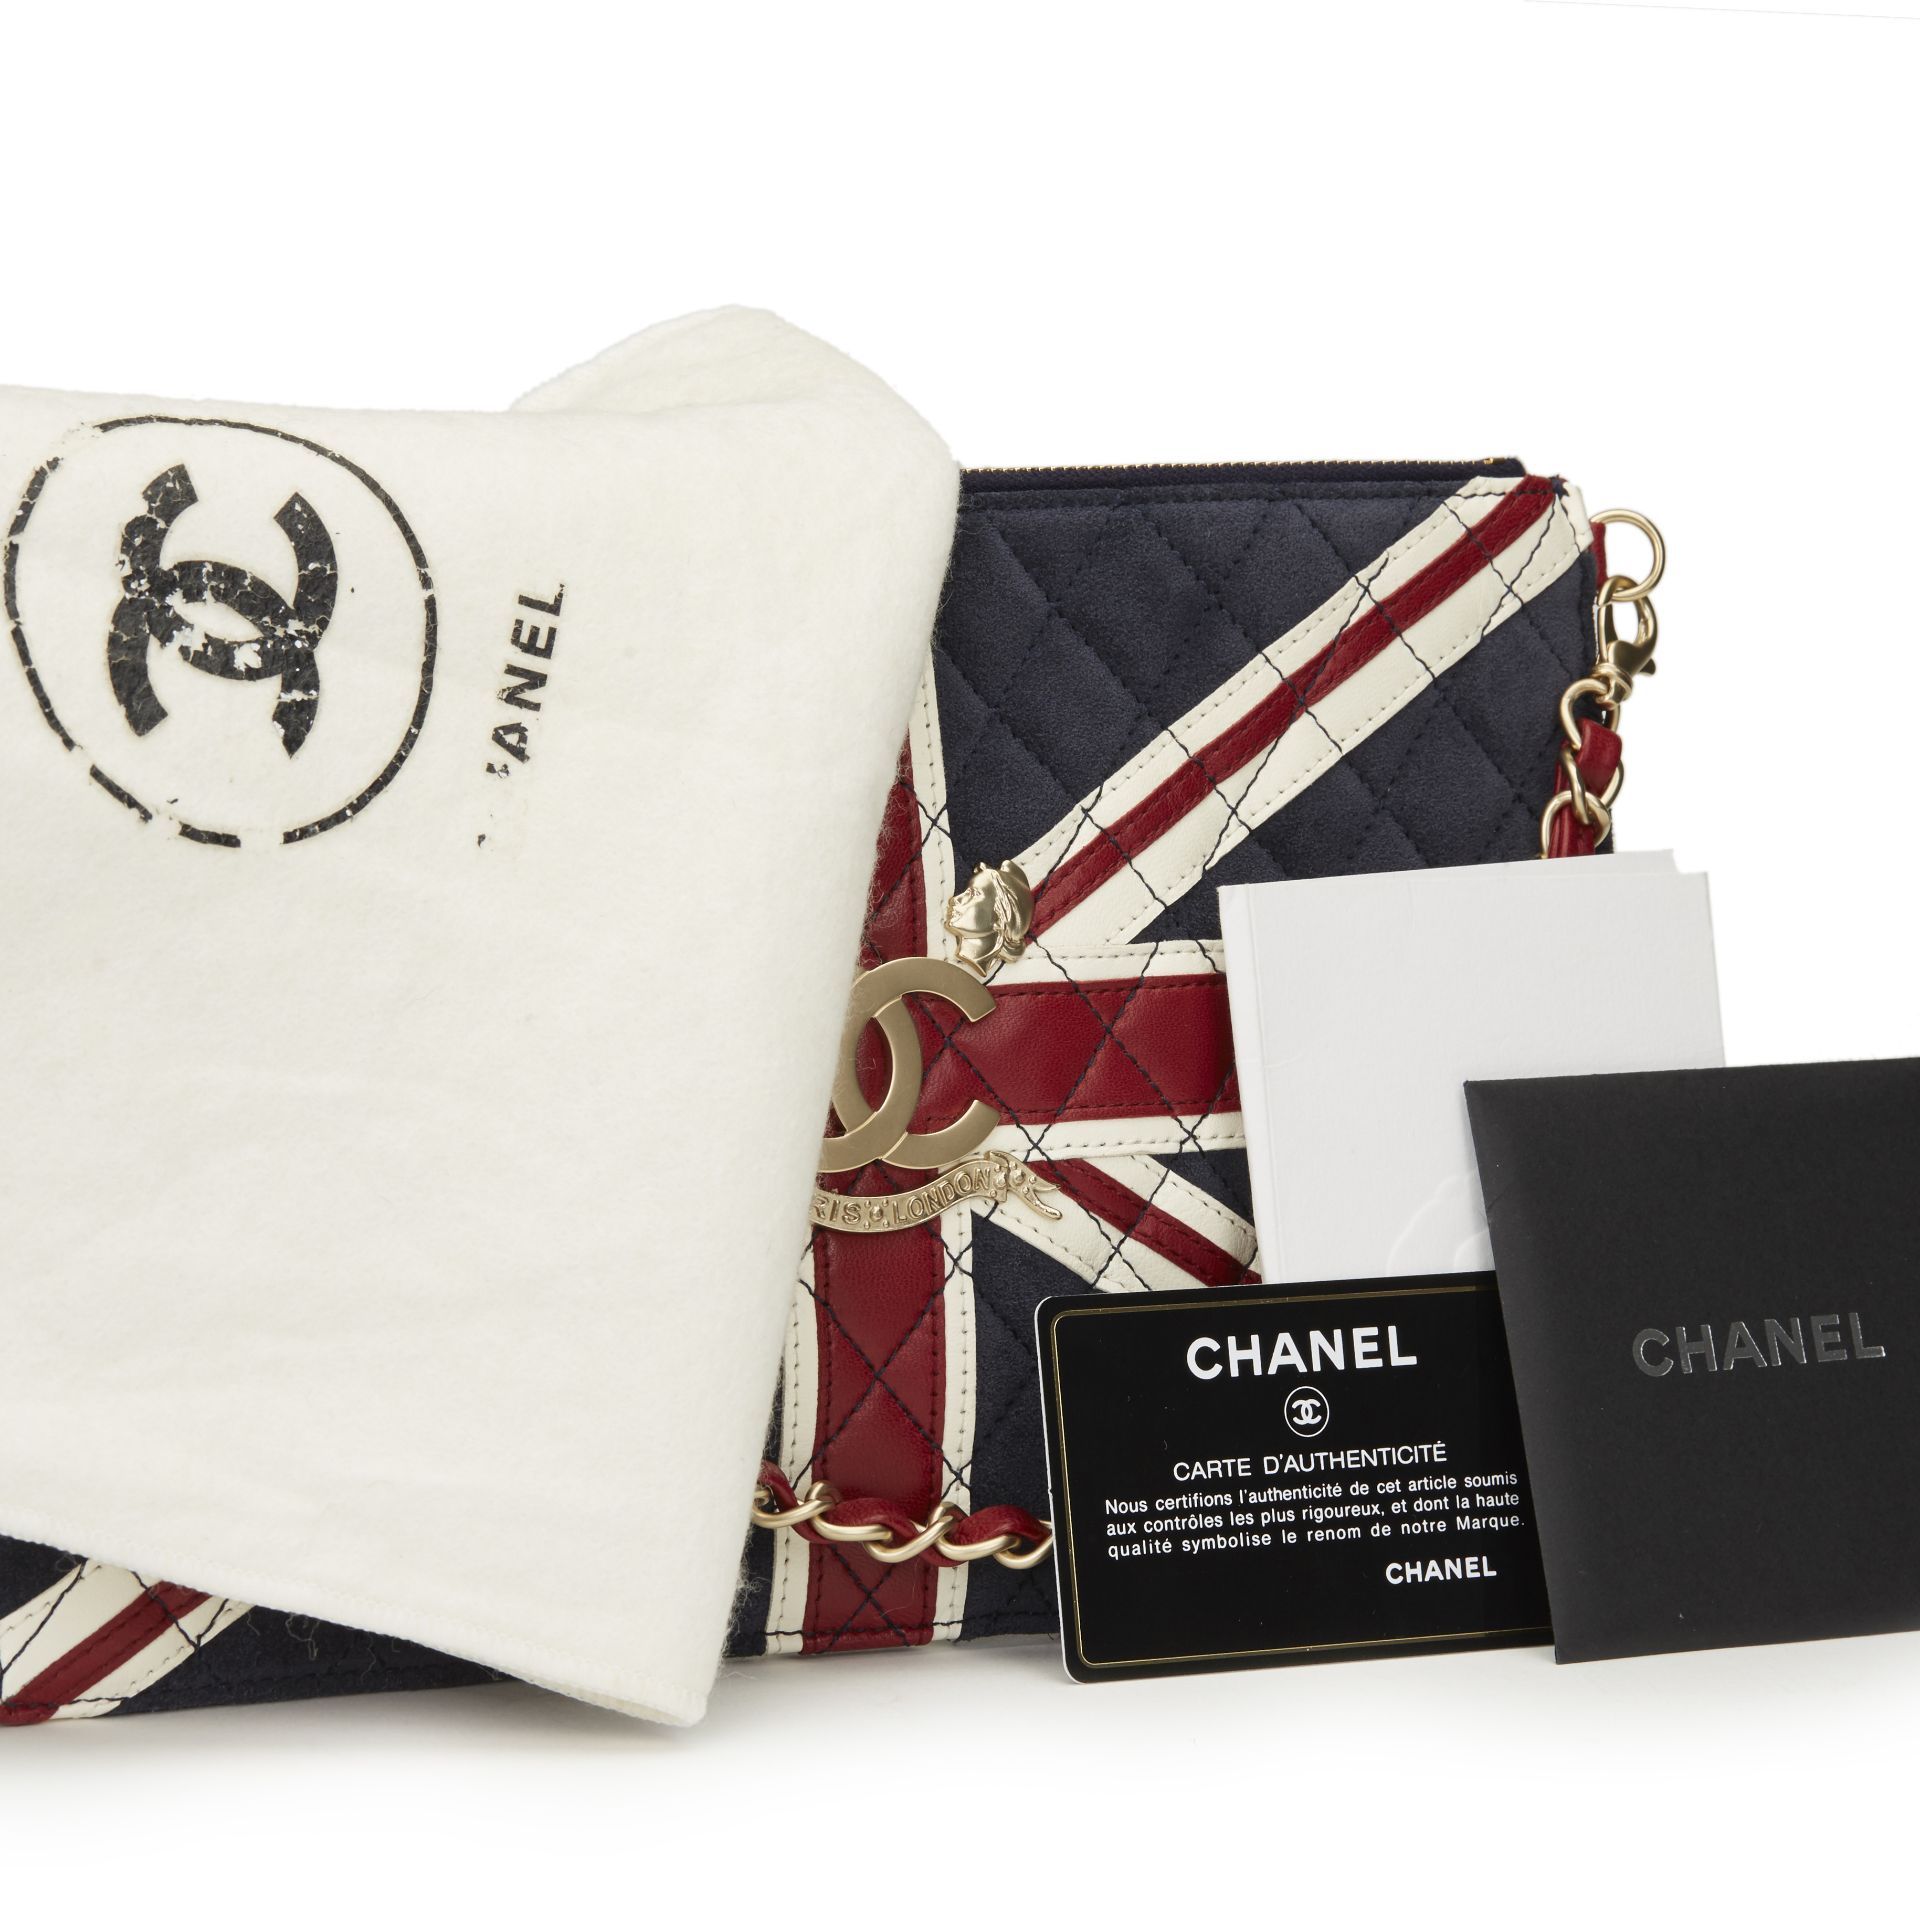 Chanel Union Jack Pouch - Image 10 of 10